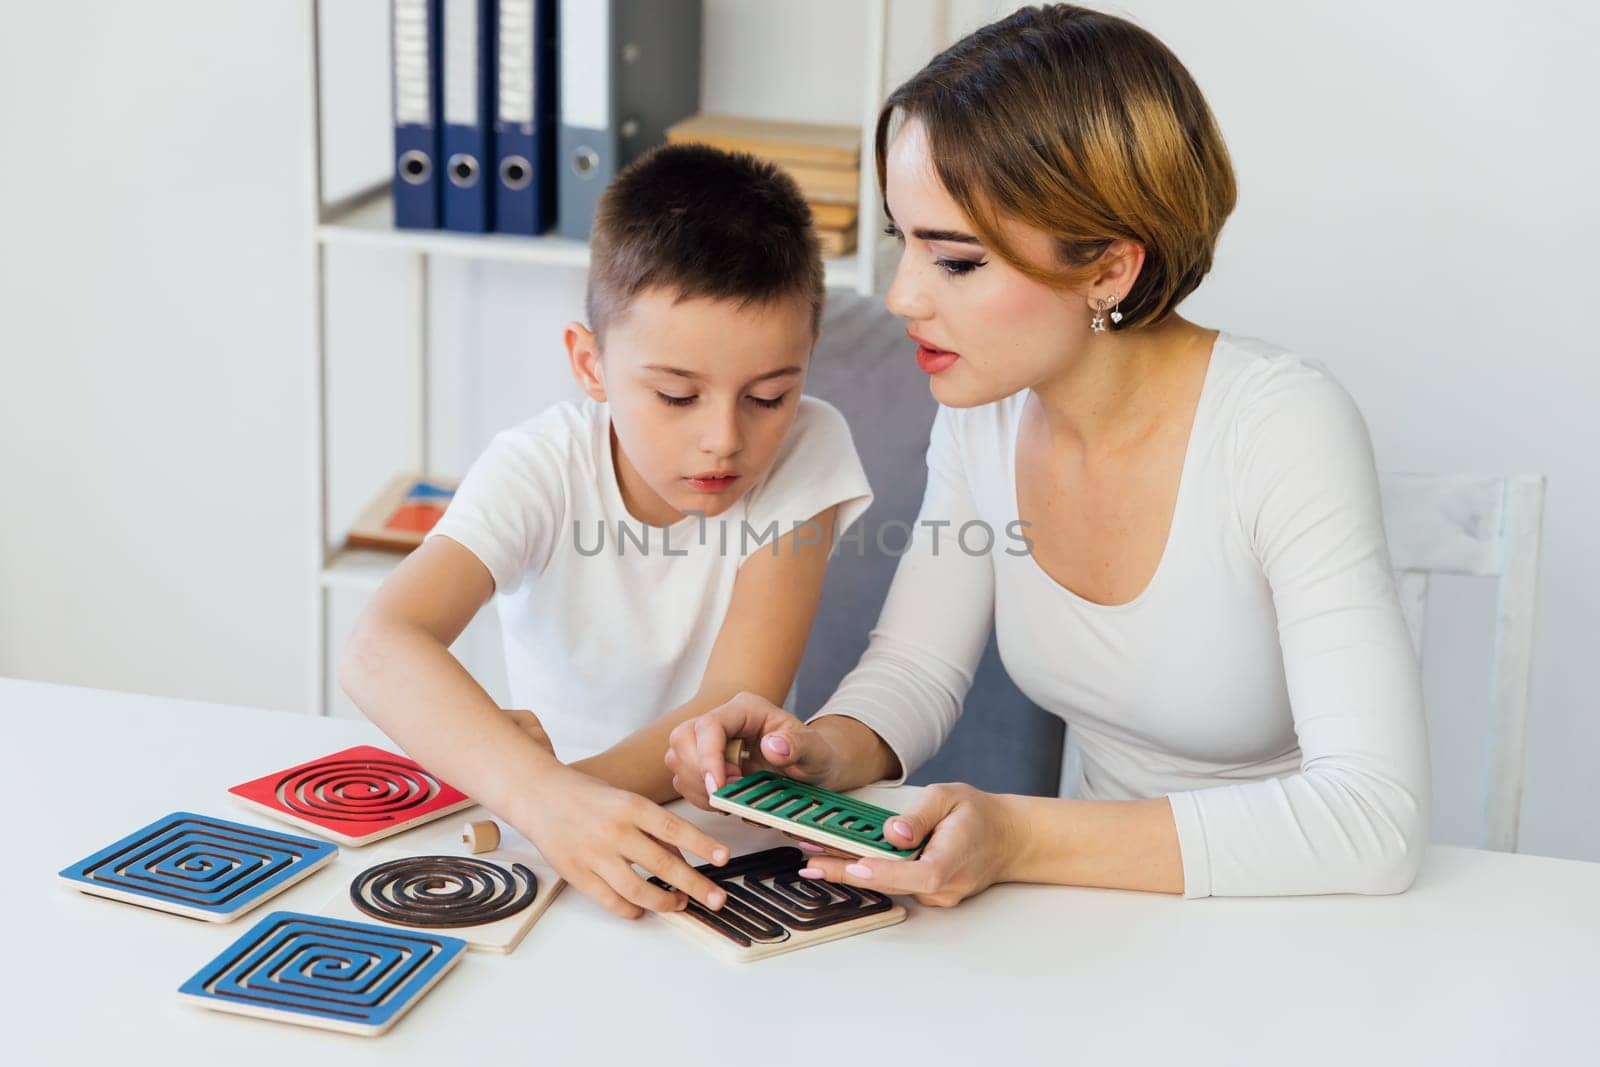 in the office of psychologist educational games work with the child